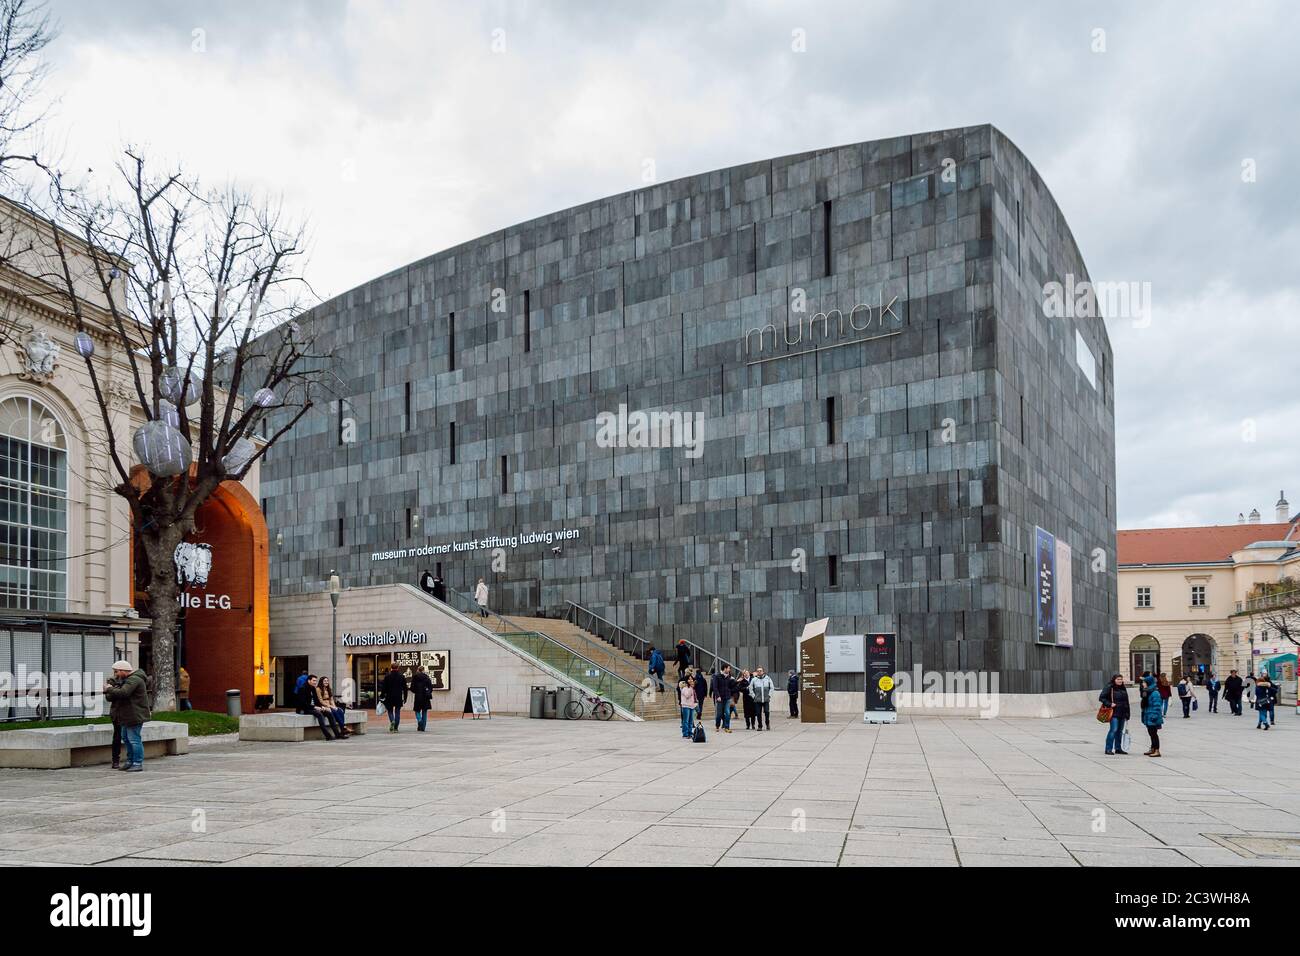 The MUMOK is the largest museum in Central Europe for art since modernism. The mumok is a place for lively discussion around contemporary art, Vienna. Stock Photo